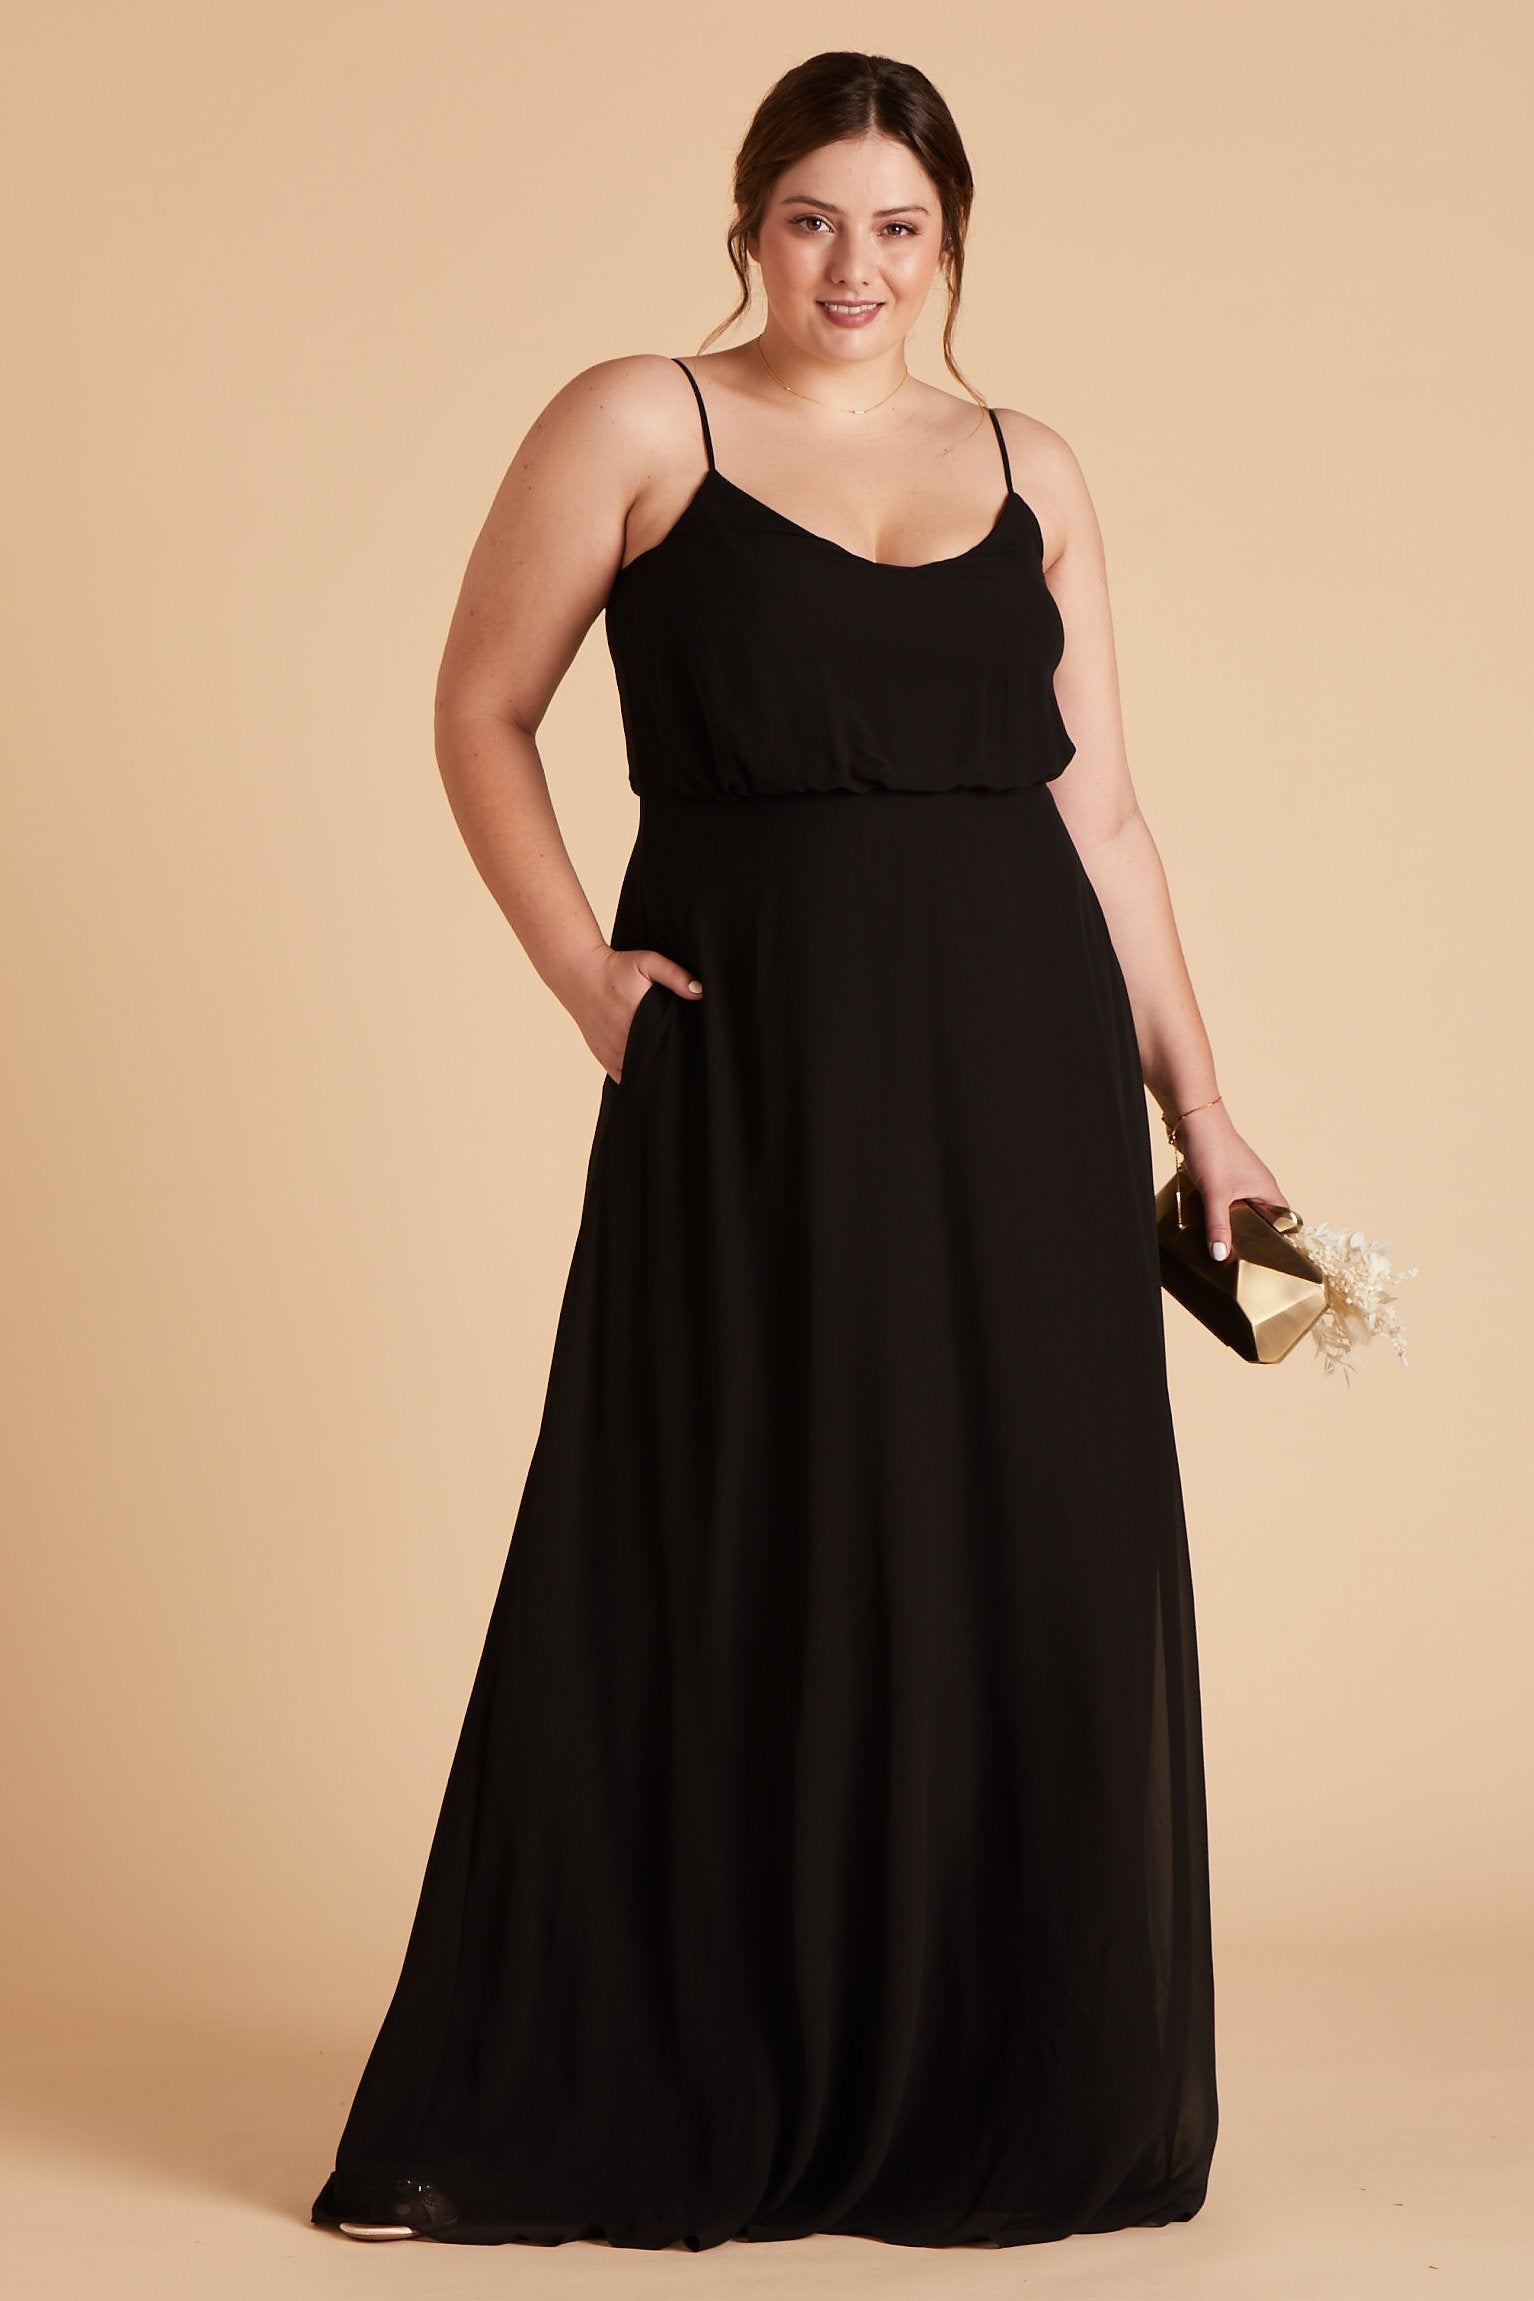 Gwennie plus size bridesmaid dress in black chiffon by Birdy Grey, front view with hand in pocket